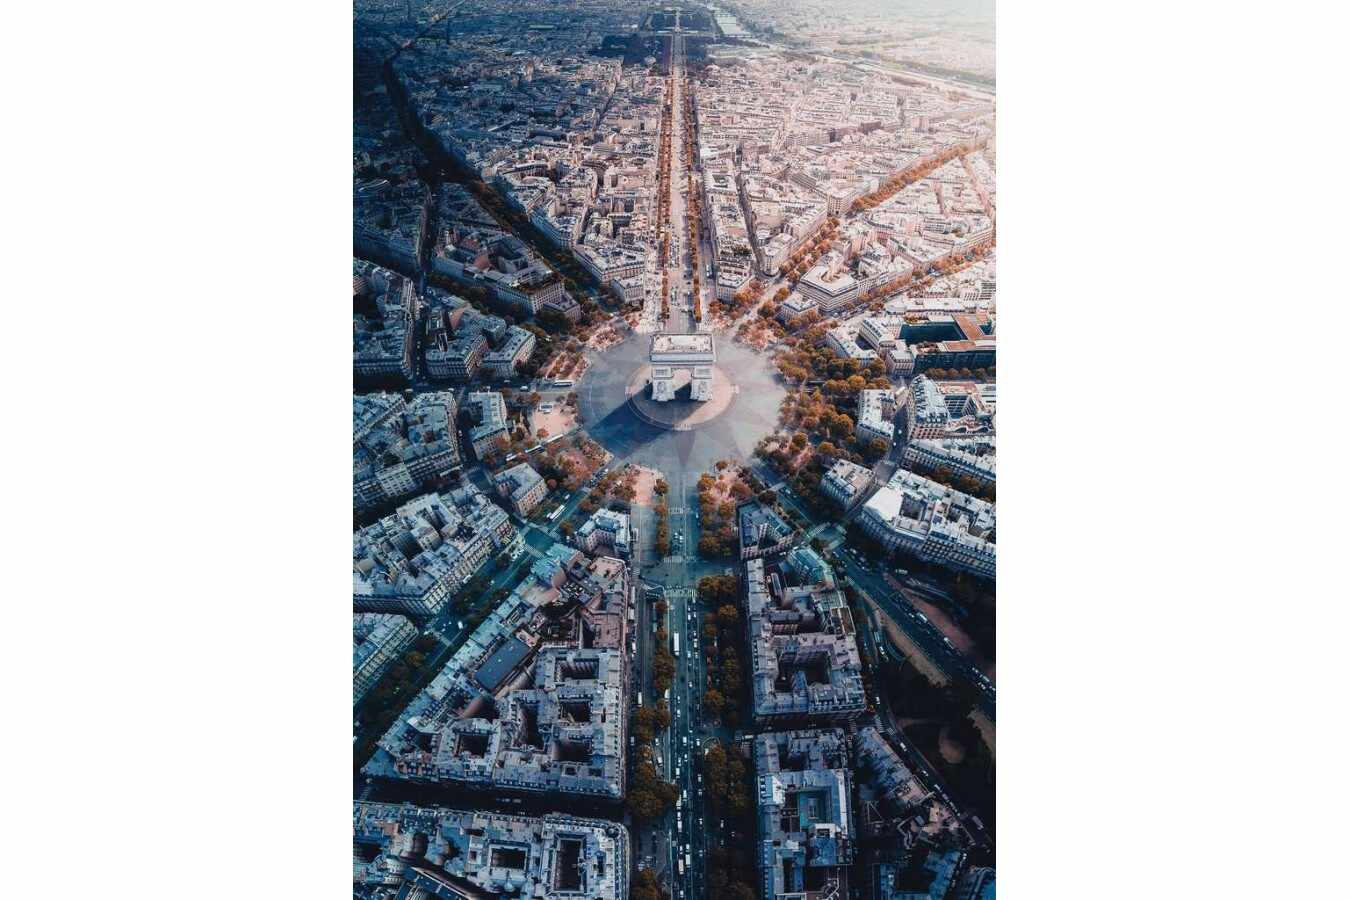 Puzzle Ravensburger - Paris seen from above, 1.000 piese (15990)